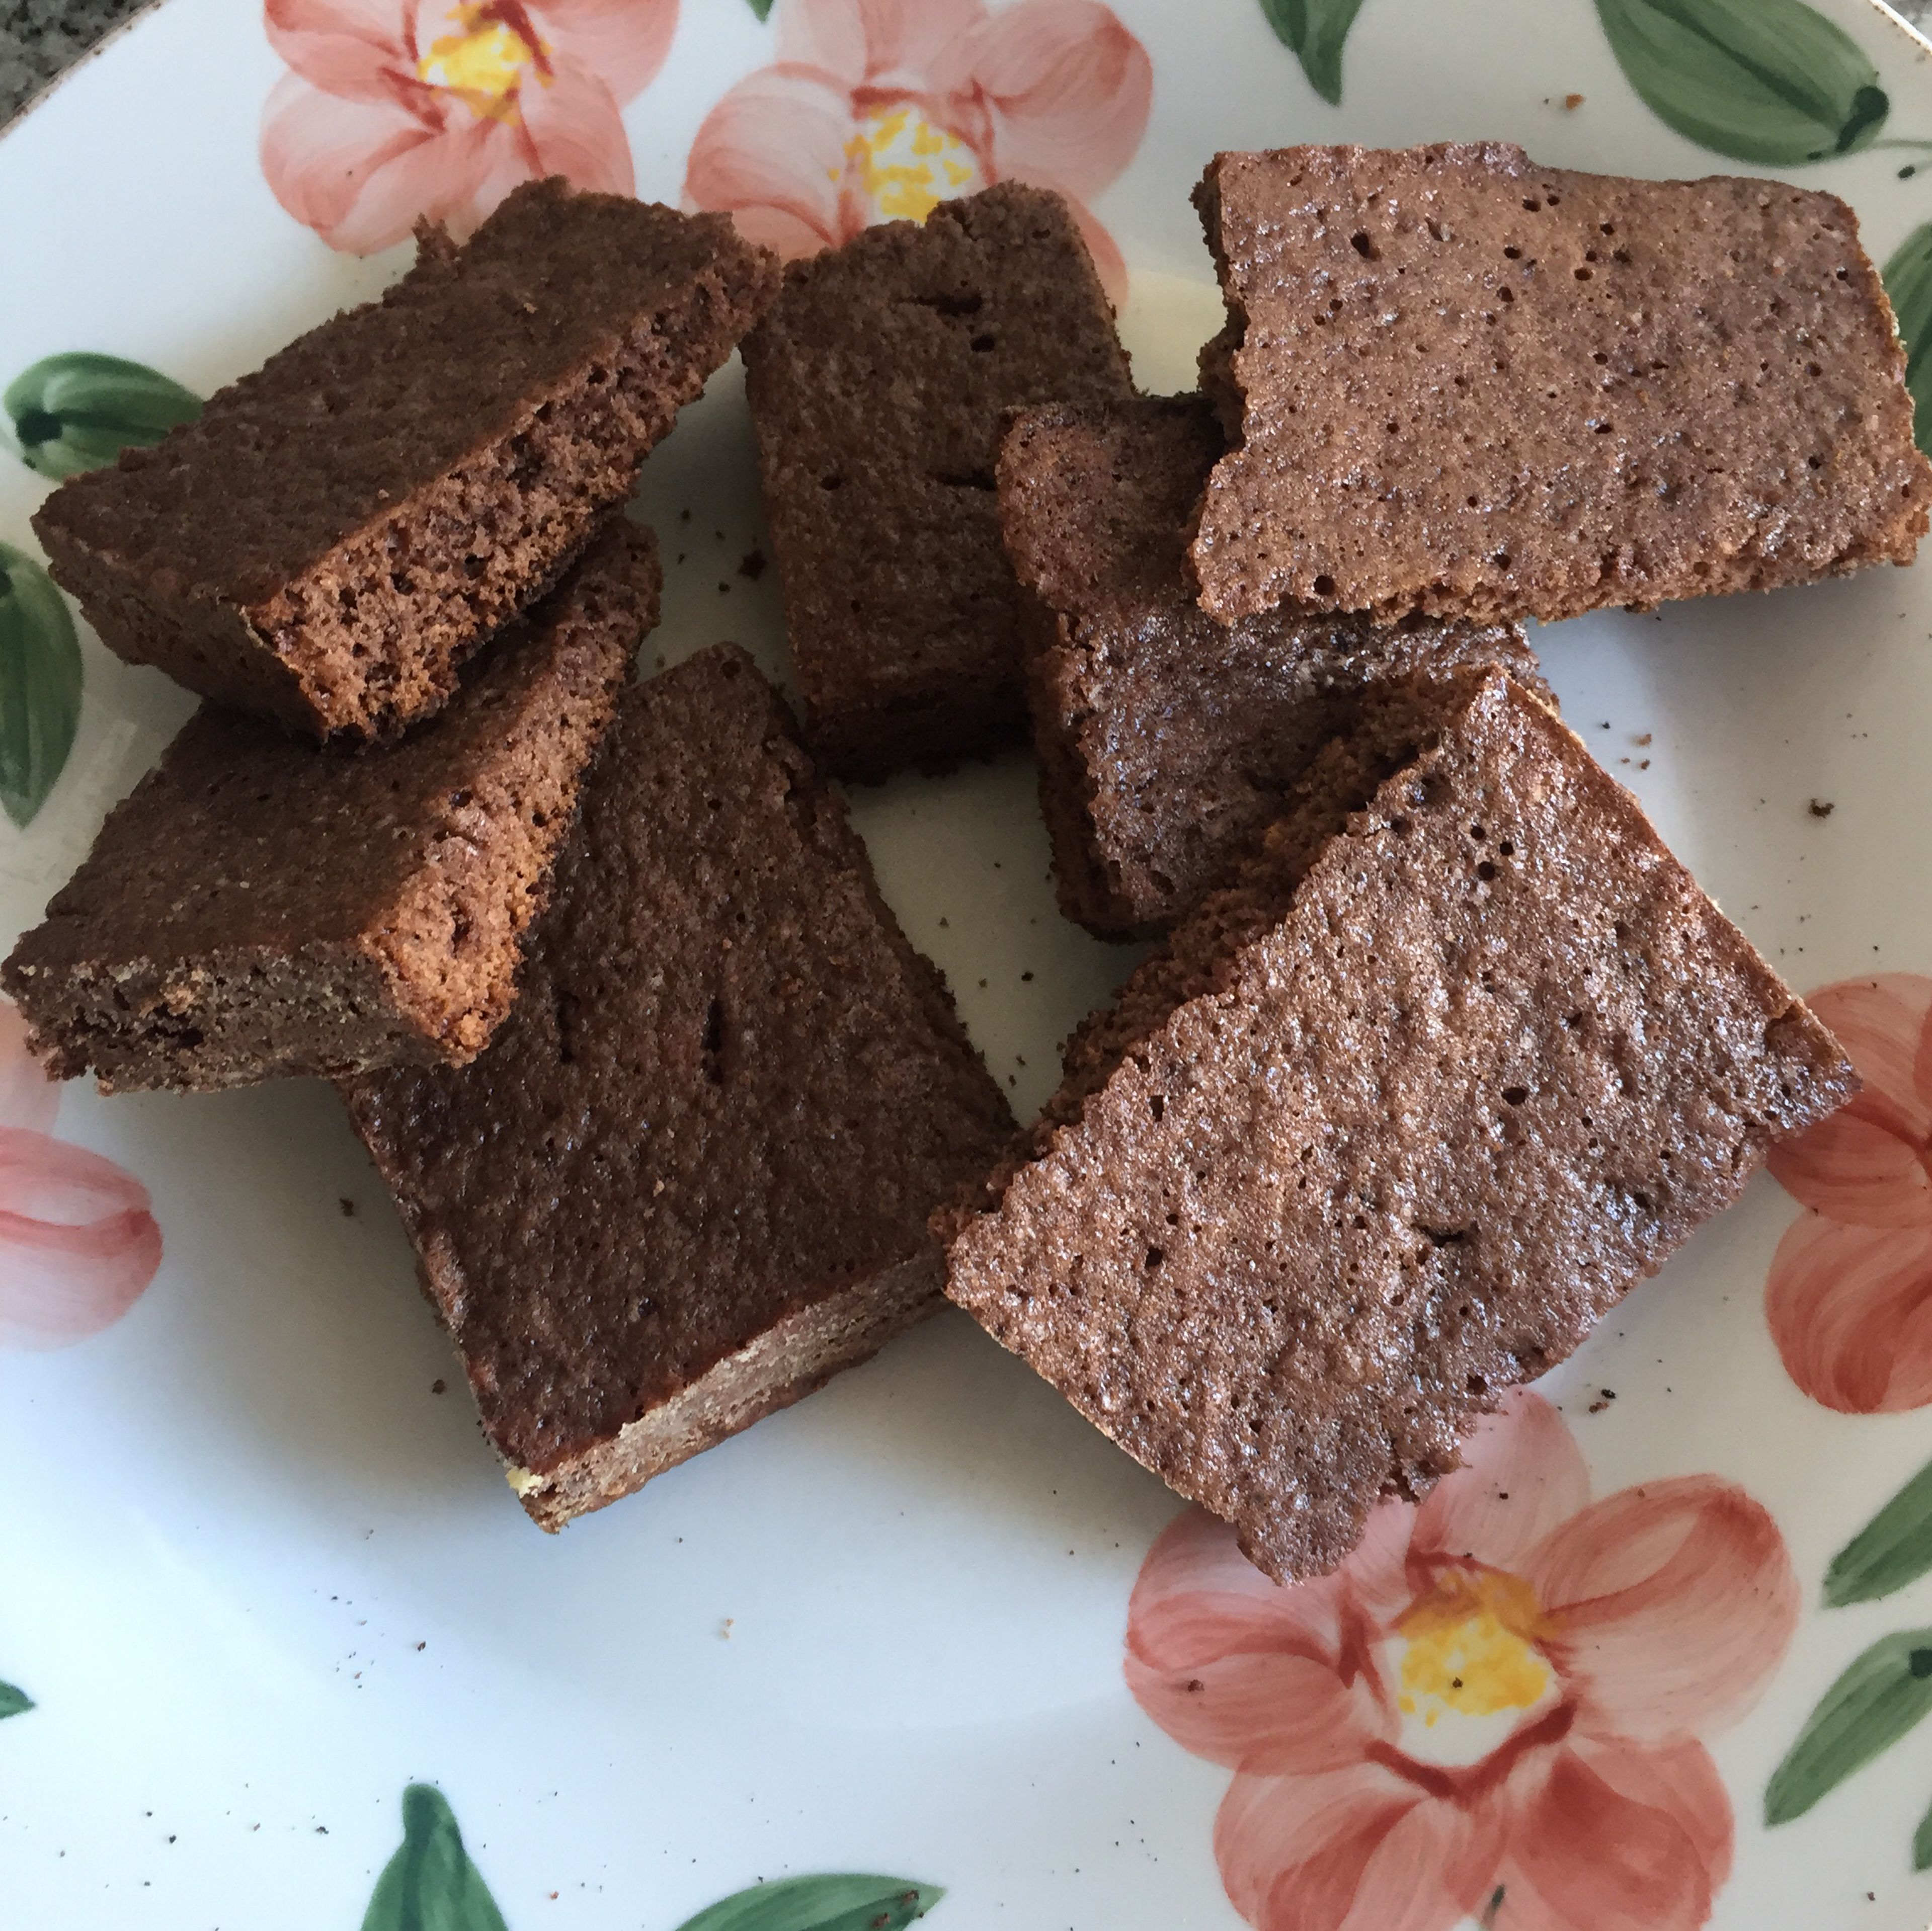 Grab six day-old brownies. The brownies should be a couple of days old for easier crumbling, but if you have fresh brownies, don’t worry! Just allow them to dry out in a warm place.